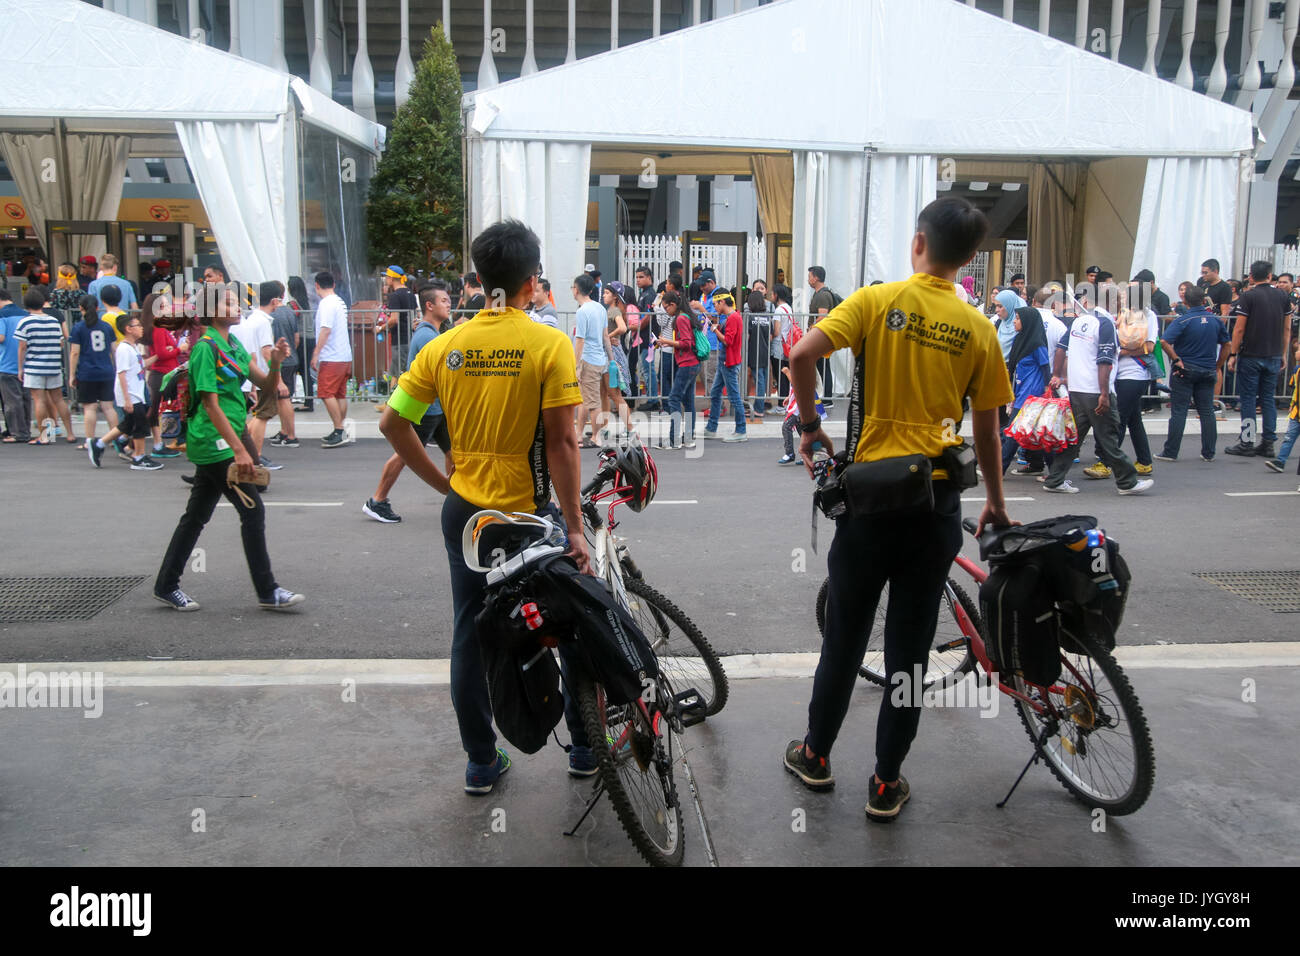 St. John Ambulance personnels on bicycle on duty during the opening ceremony of 29th SEA games. Credit: Calvin Chan/Alamy Live News Stock Photo